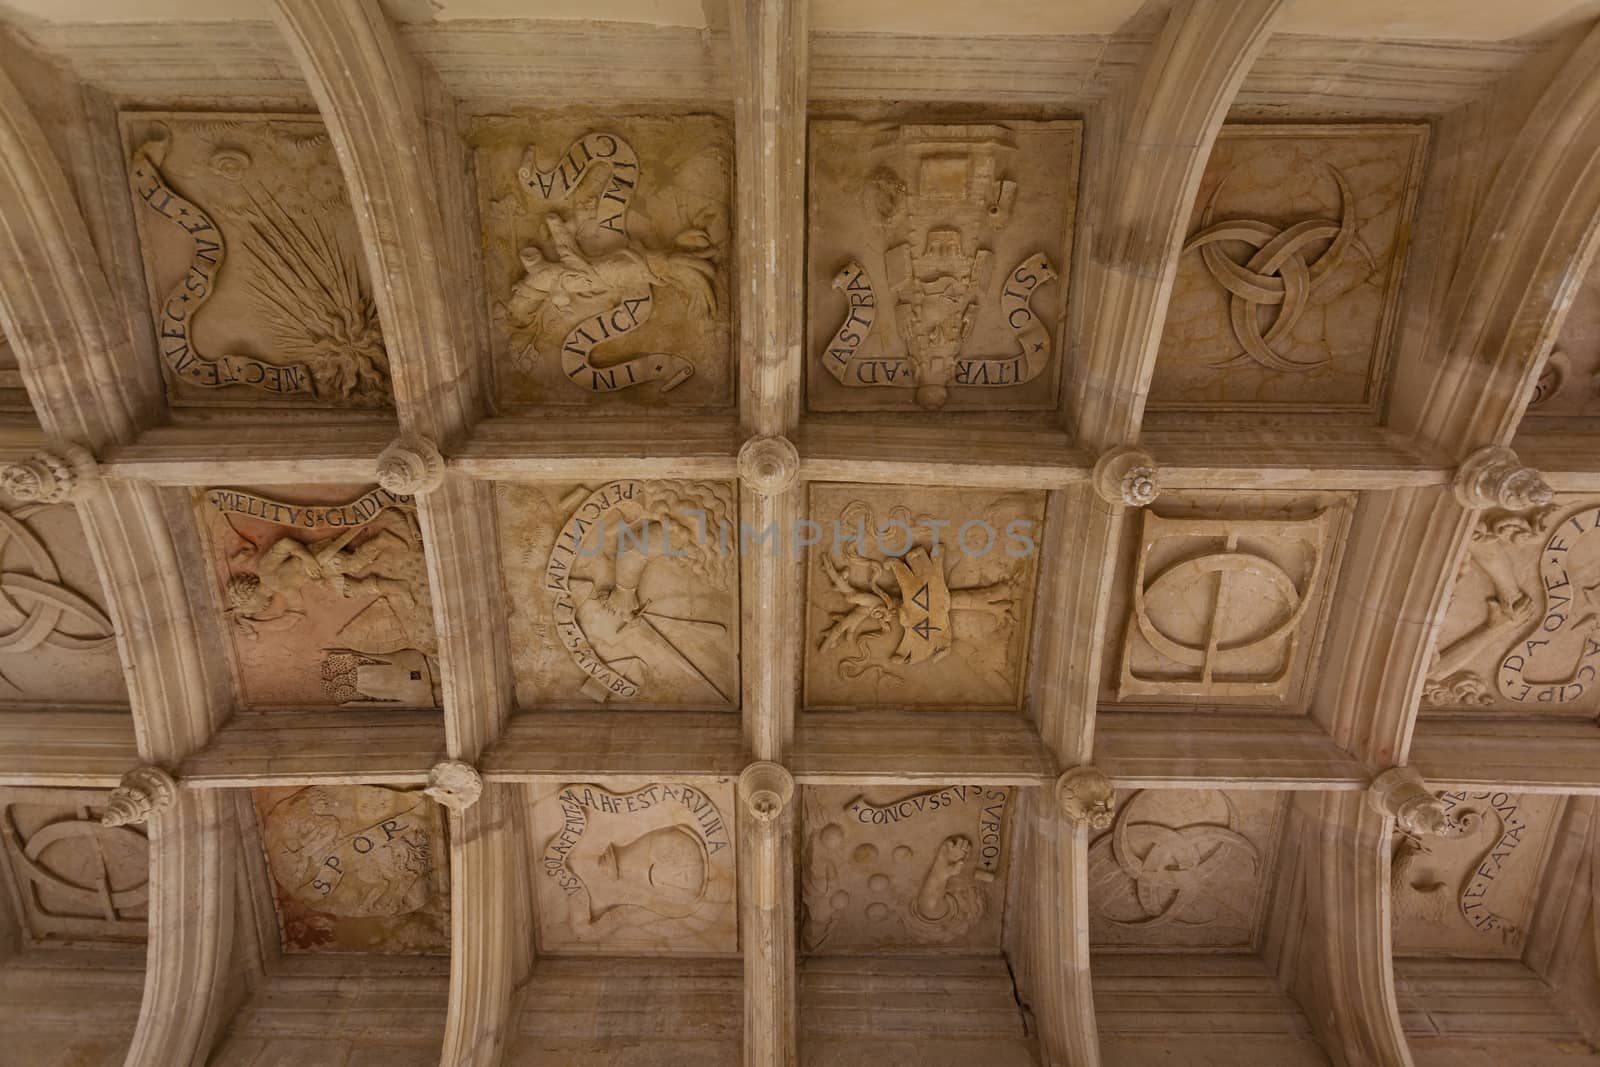 symbolic coffered ceiling of Dampierre-sur-Boutonne castle in charente maritime , France